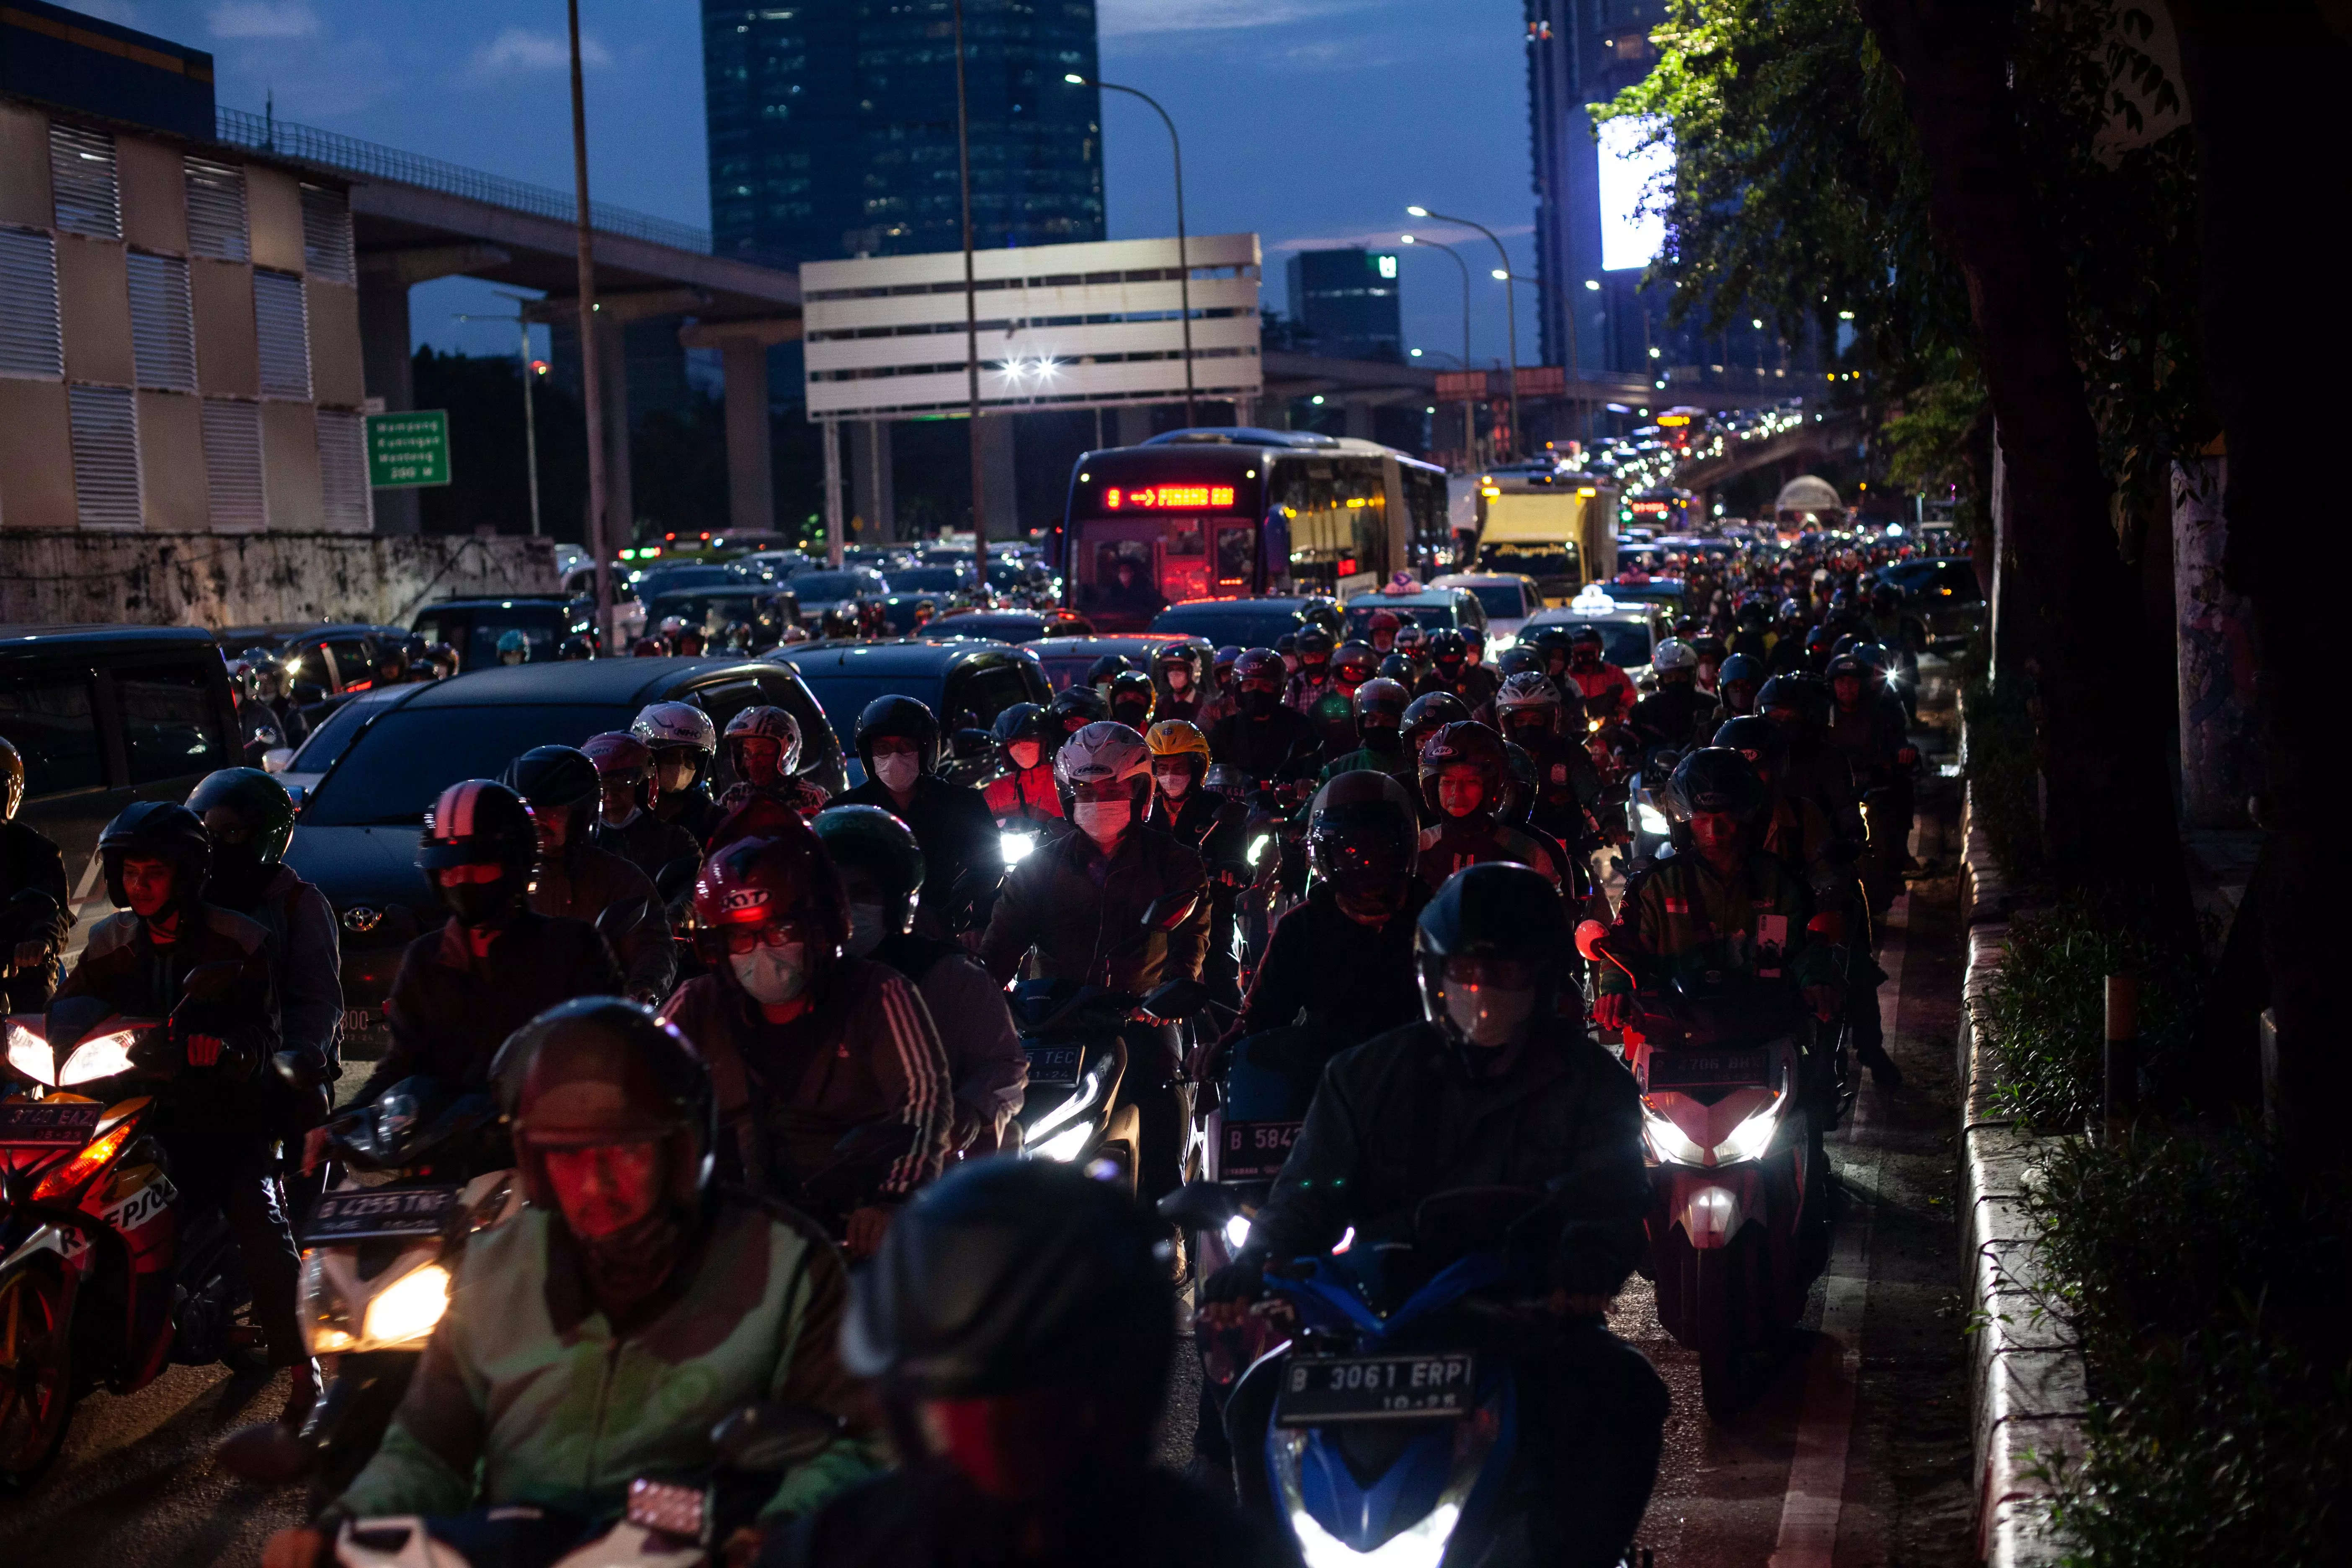 Jakarta is known in the region for its notorious rush hour jams.